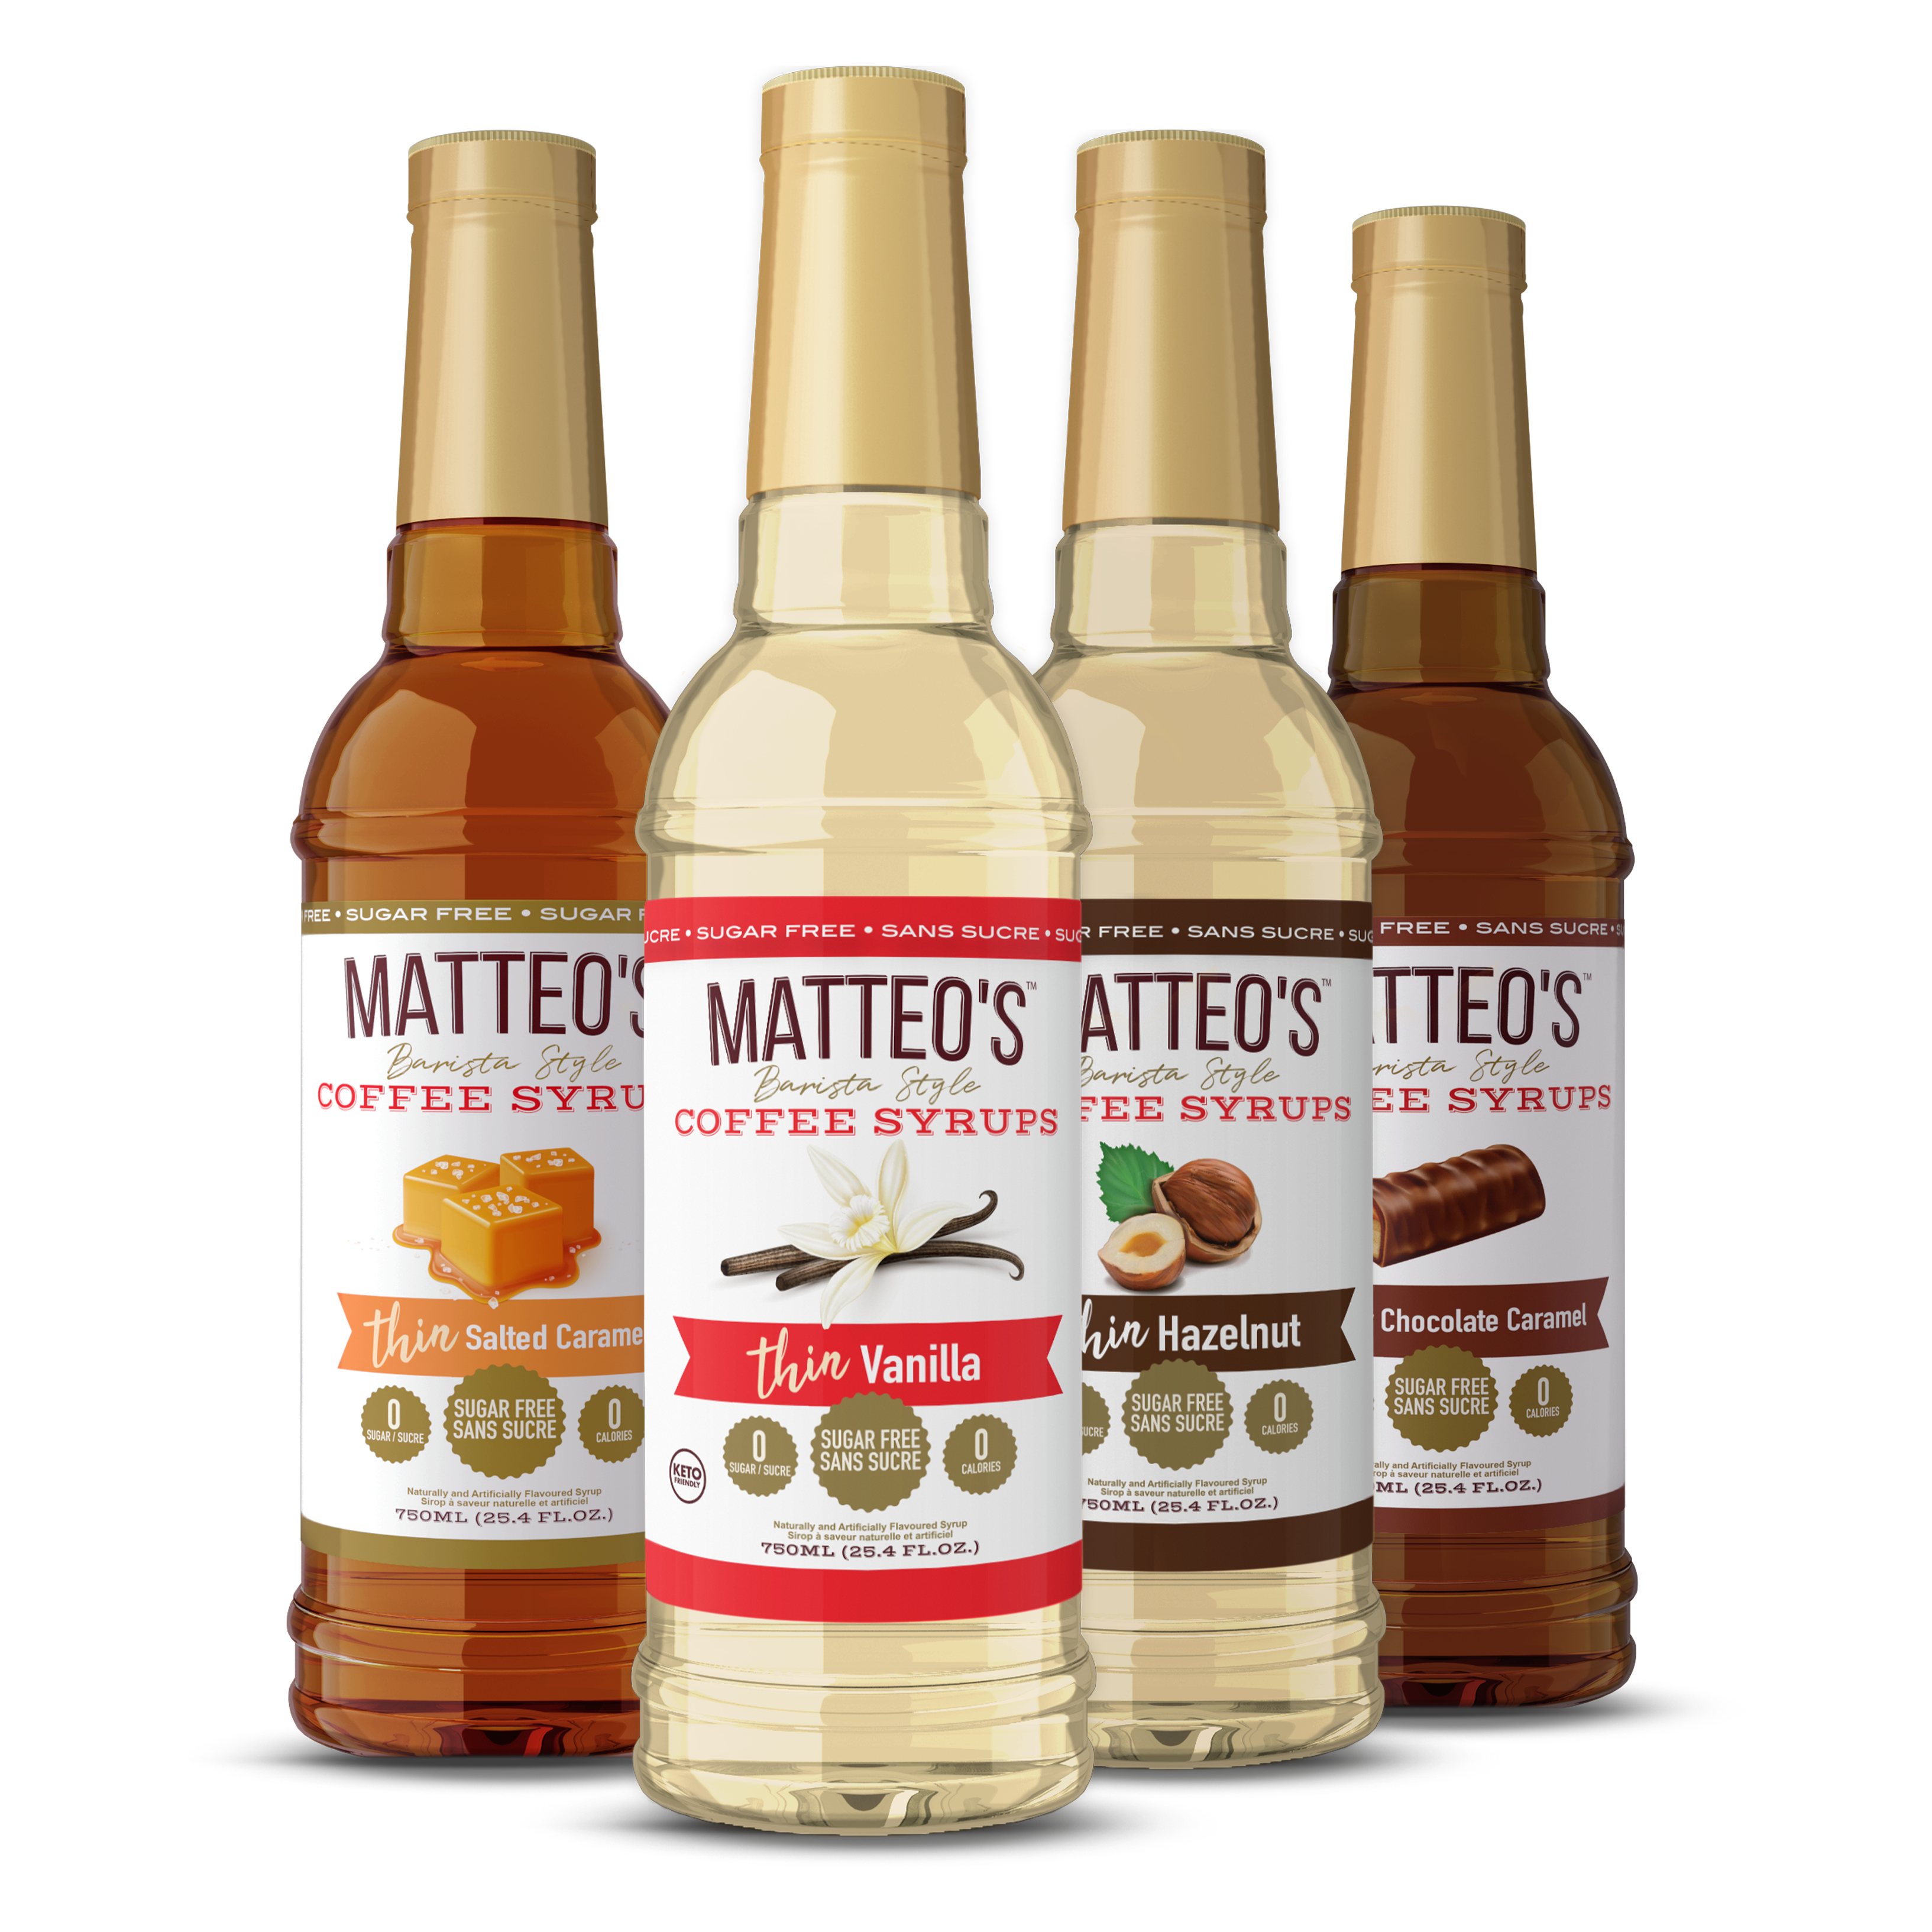 Sugar Free Coffee Syrup, Variety Pack, (4 Flavors) - Matteo's Coffee Syrup